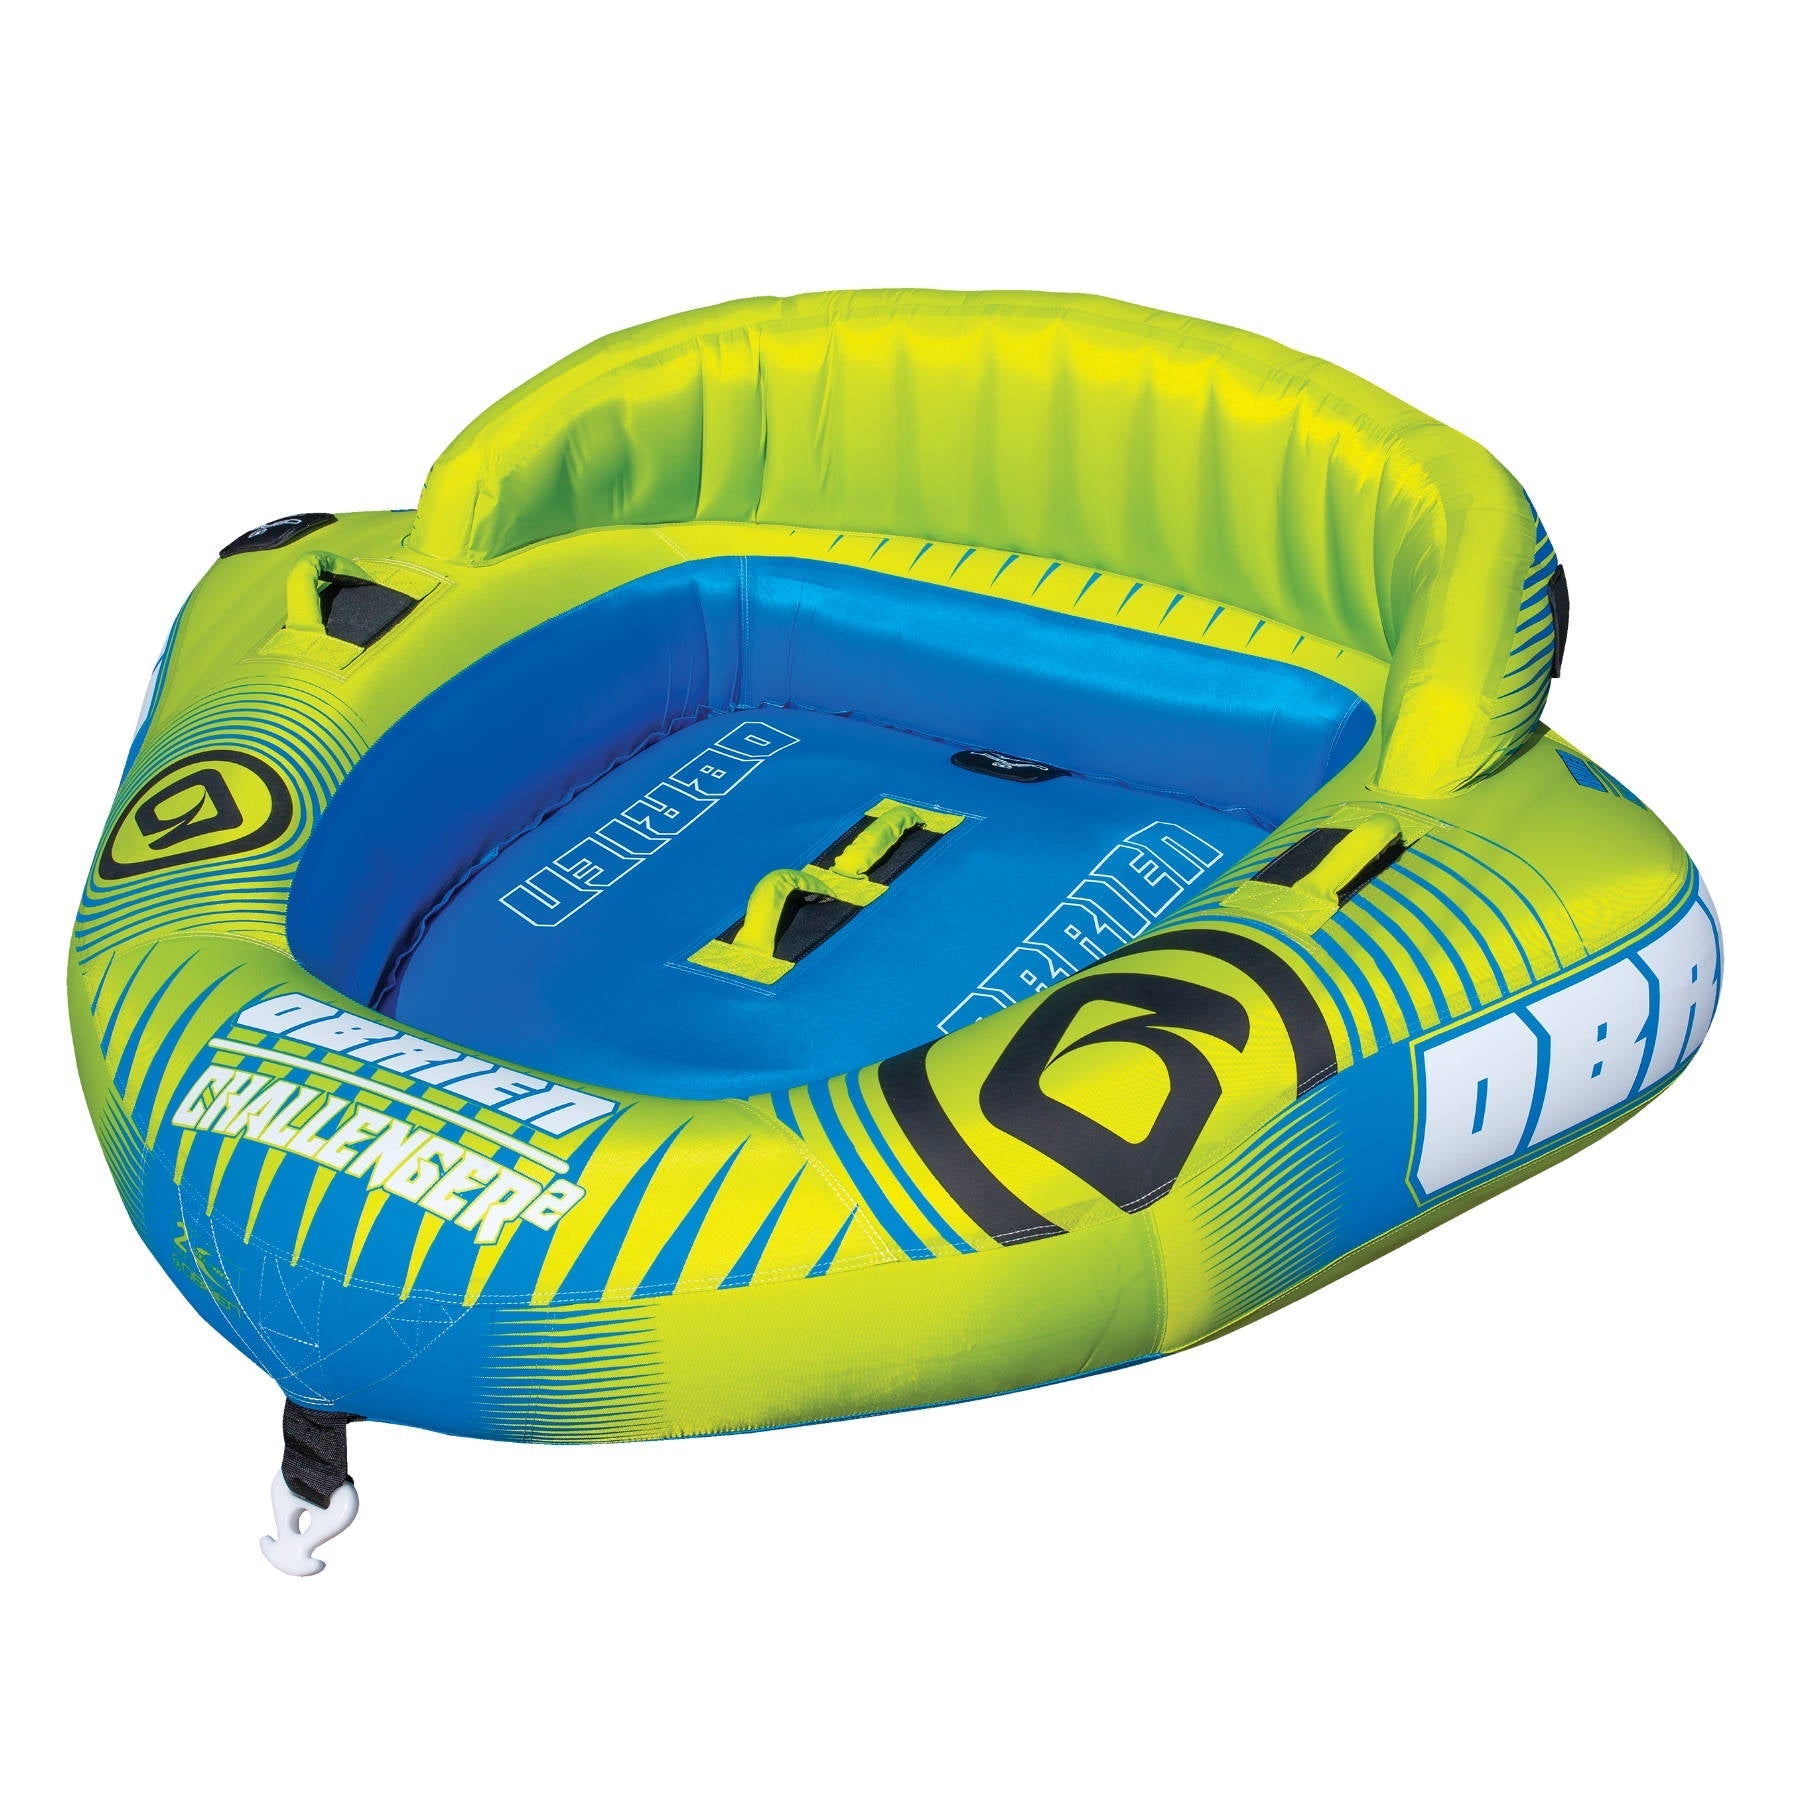 O'Brien Challenger - 2 Person Towable Boat Tube